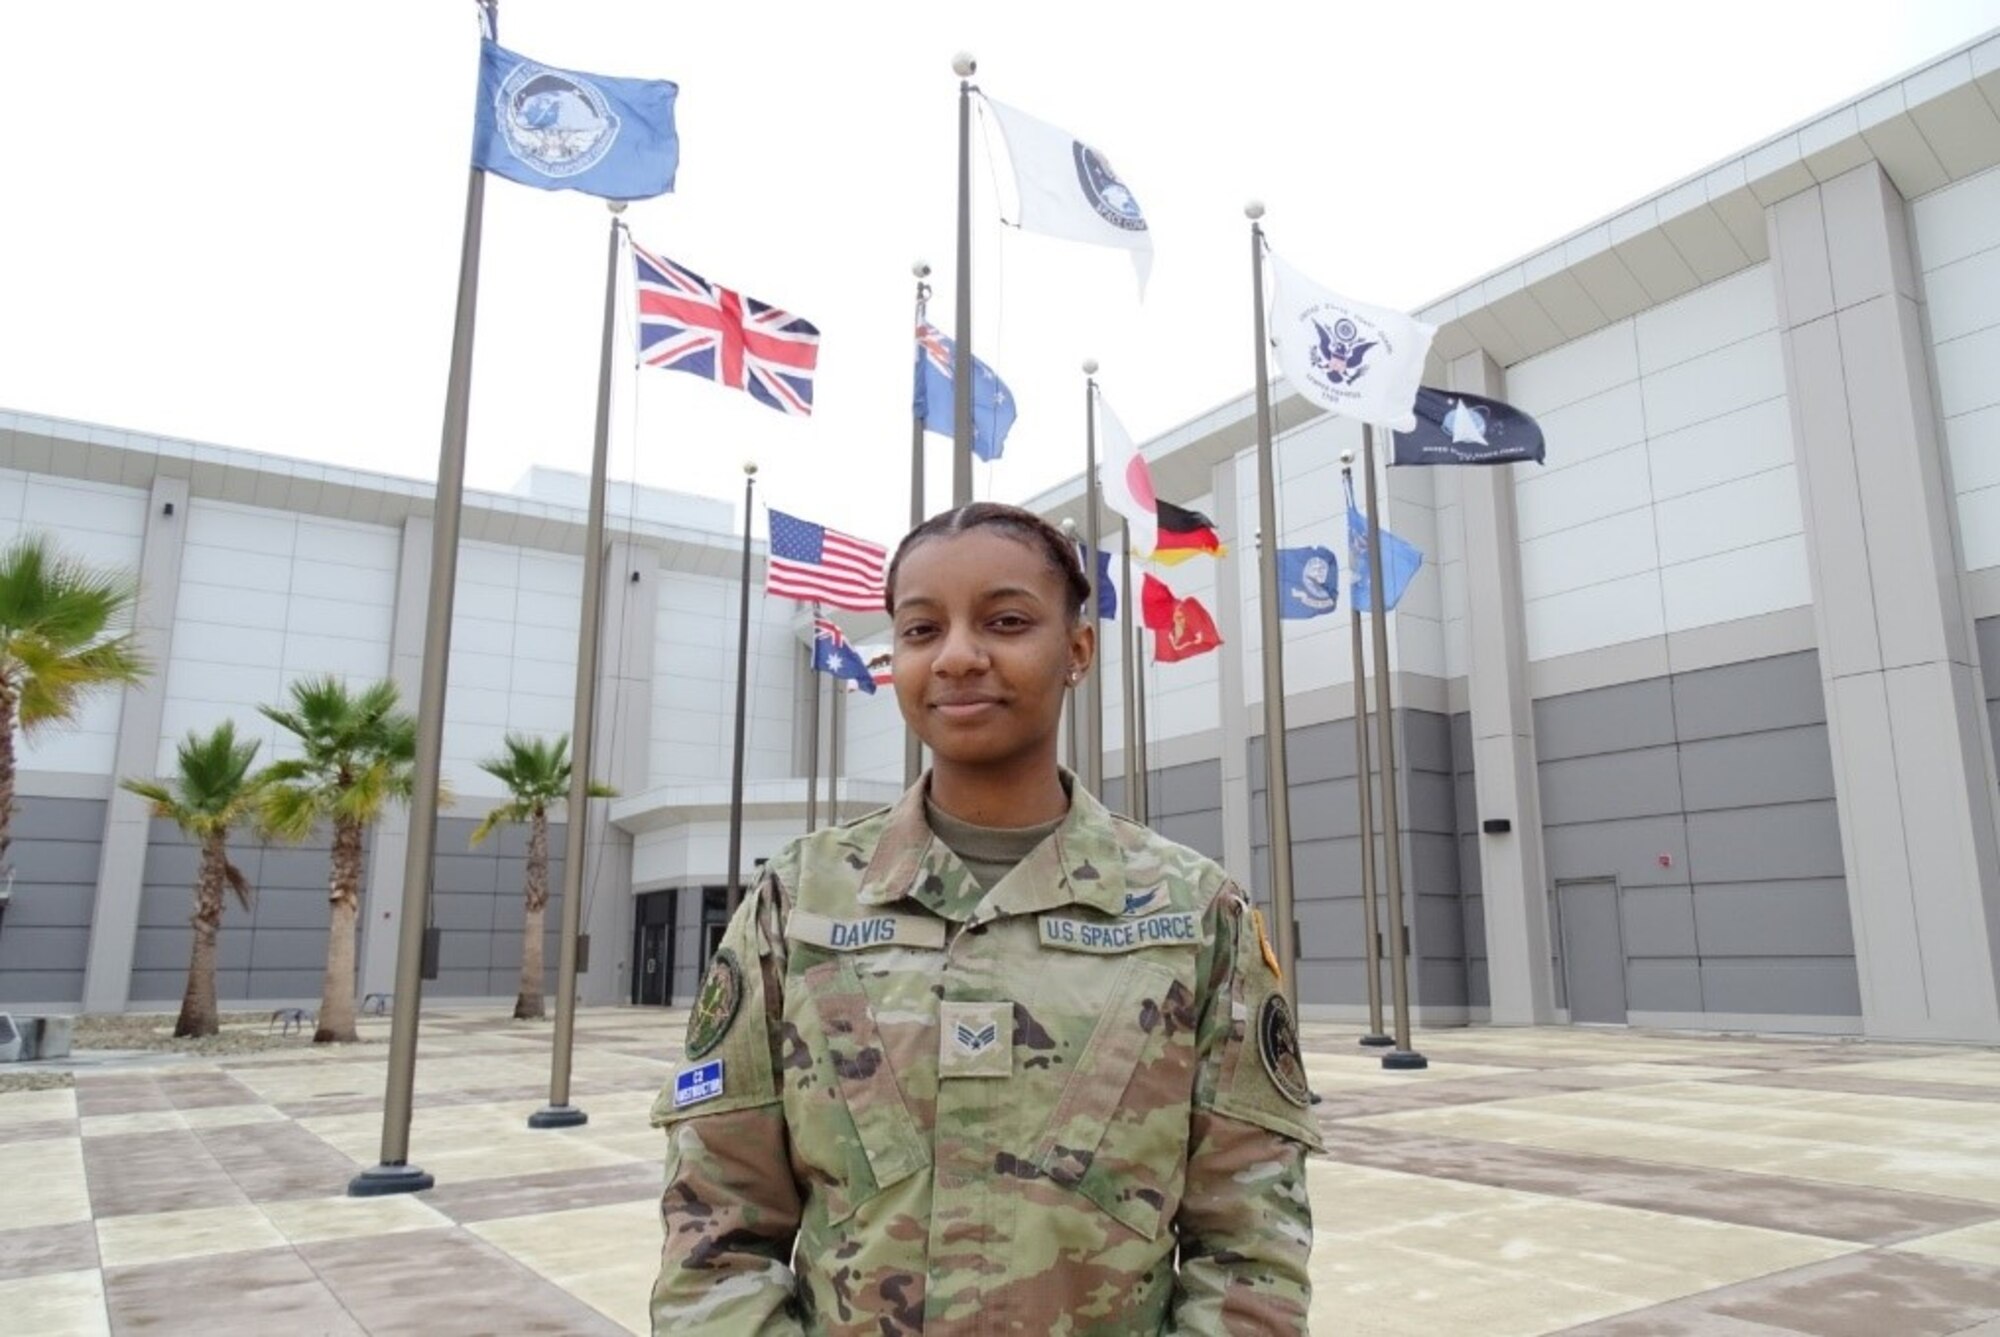 Specialist 4 Quineaja Davis stands for a photo in front of the Combined Force Space Component Command headquarters building Dec. 13, 2021, at Vandenberg Space Force Base, Calif. An Electromagnetic Duty Operator working at the Combined Space Operations Center, Davis recently won the CFSCC third quarter award in the junior enlisted category, in part because she helped in the effort to monitor secure U.S. Space Command and commercial satellite communication links during the emergency airlift operation at Kabul Airport, ensuring the evacuation of more than 124,000 U.S. citizens and multi-national refugees from Afghanistan. (U.S. Space Force photo by Lt. Col. Mae-Li Allison)